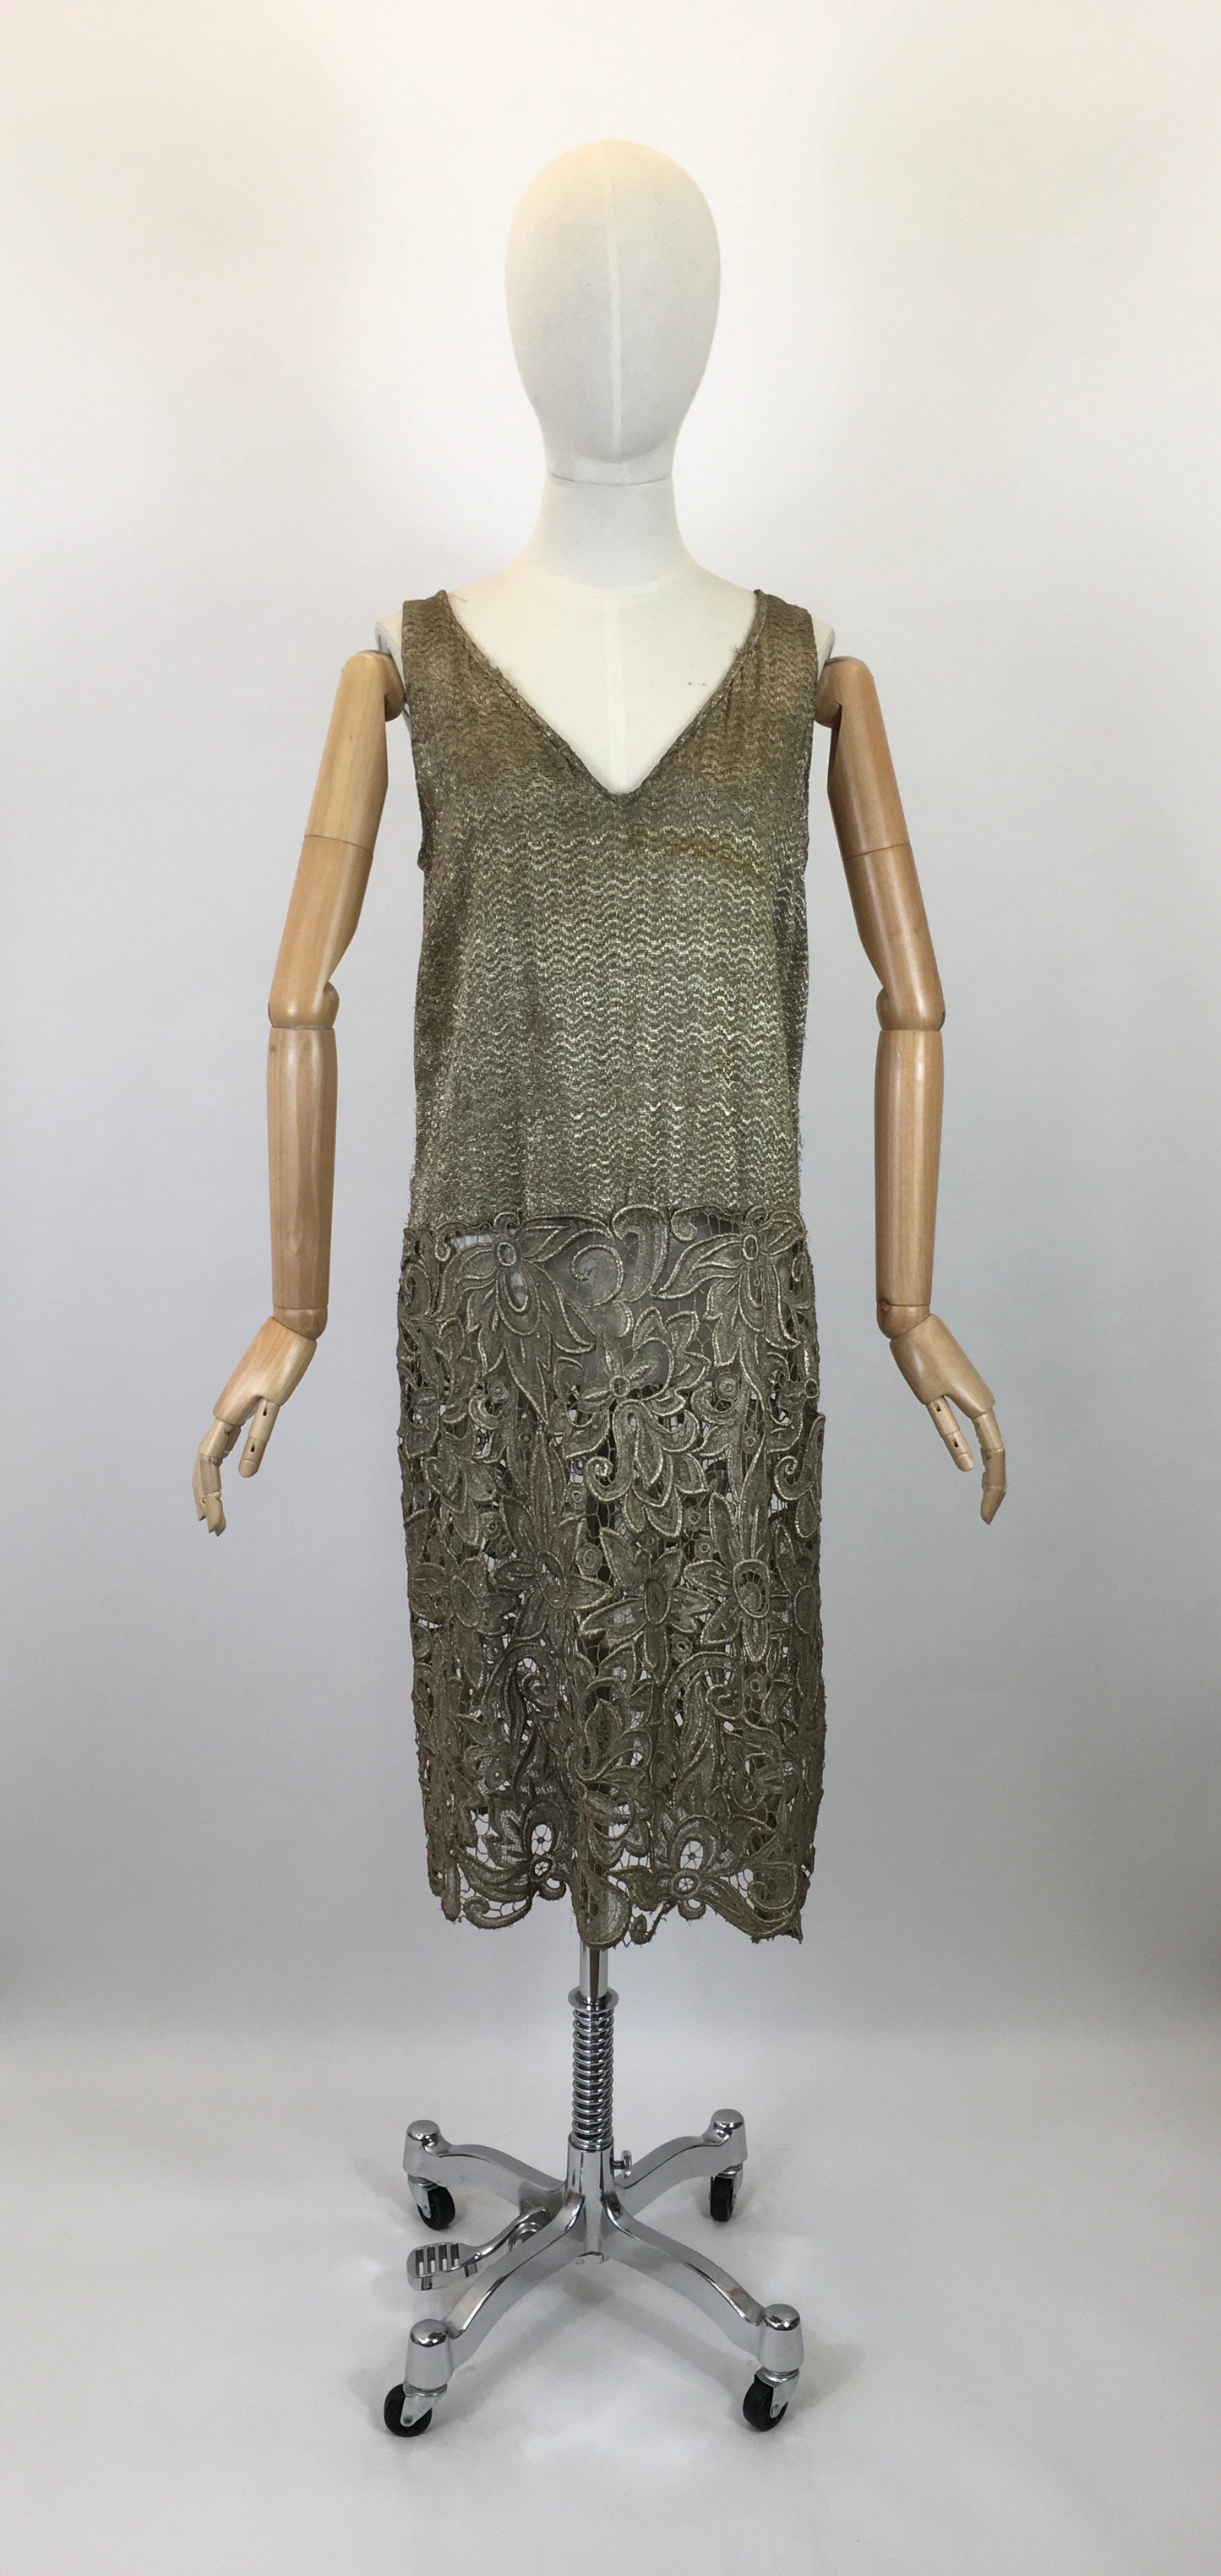 Original 1920's Sensational Gold Lame Dress with Fretwork Floral - Worn in 1926 For The Original Owners Wedding